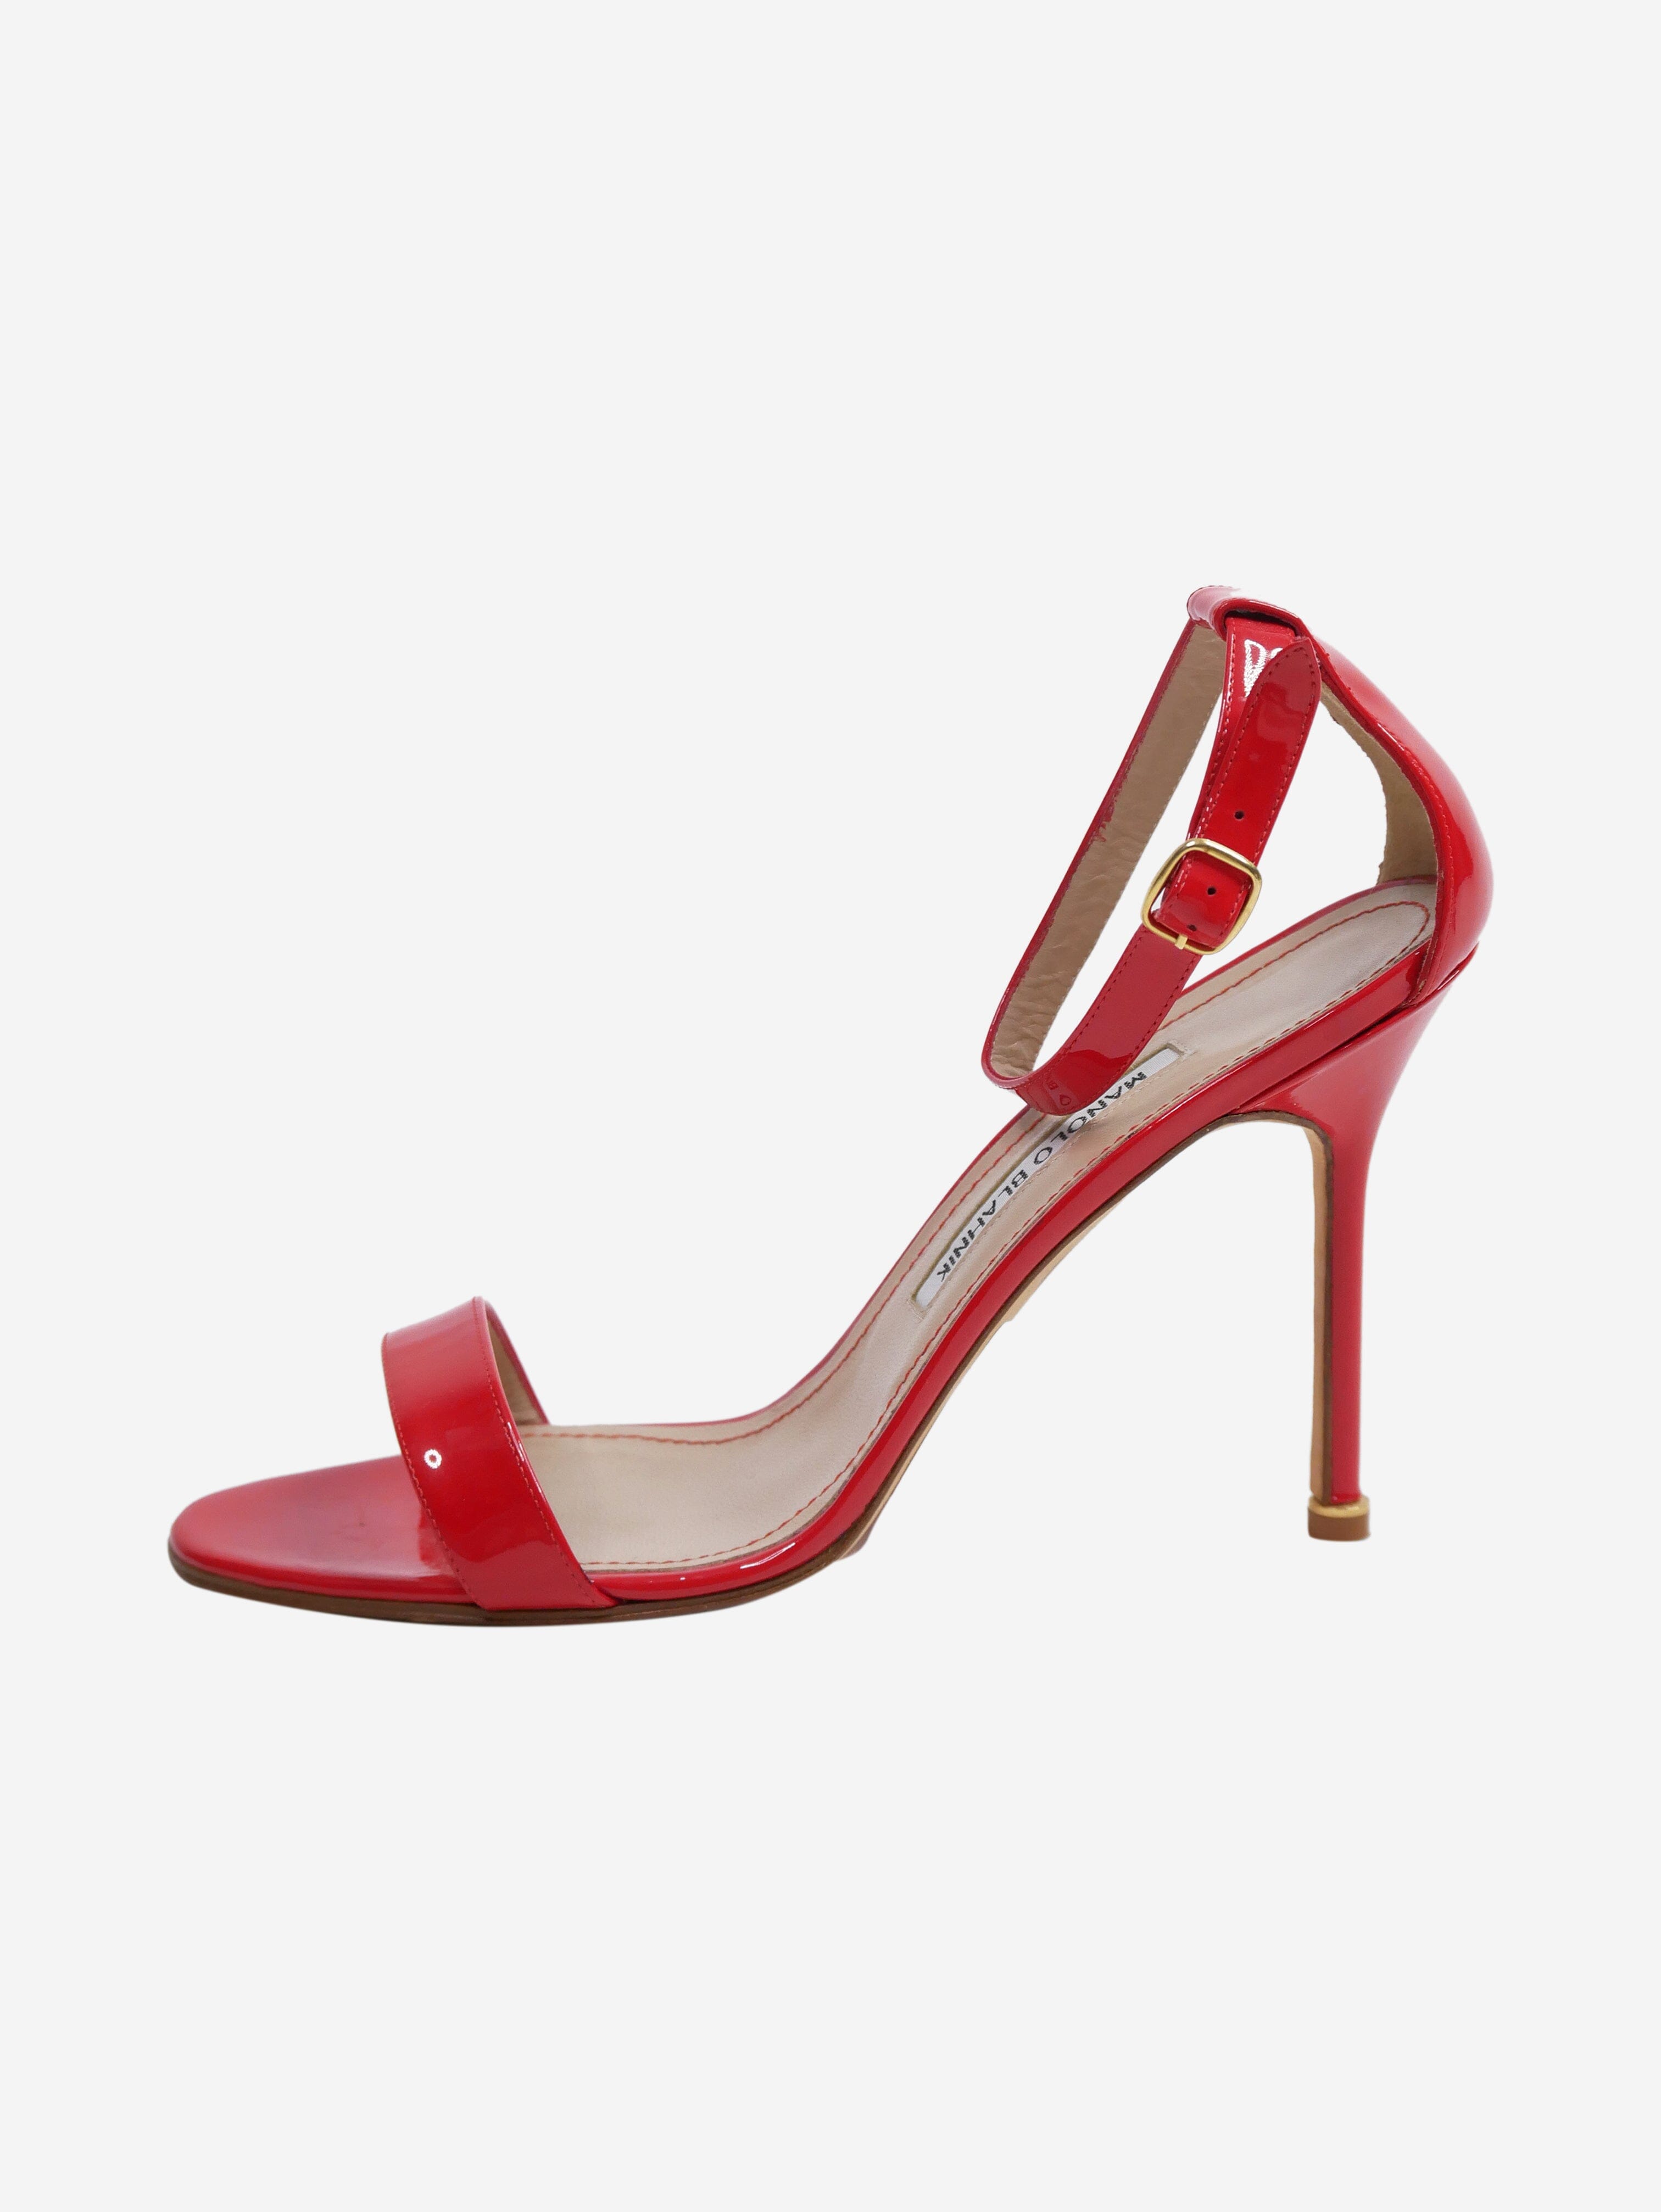 Patent leather heels Prada Red size 38 EU in Patent leather - 21168841